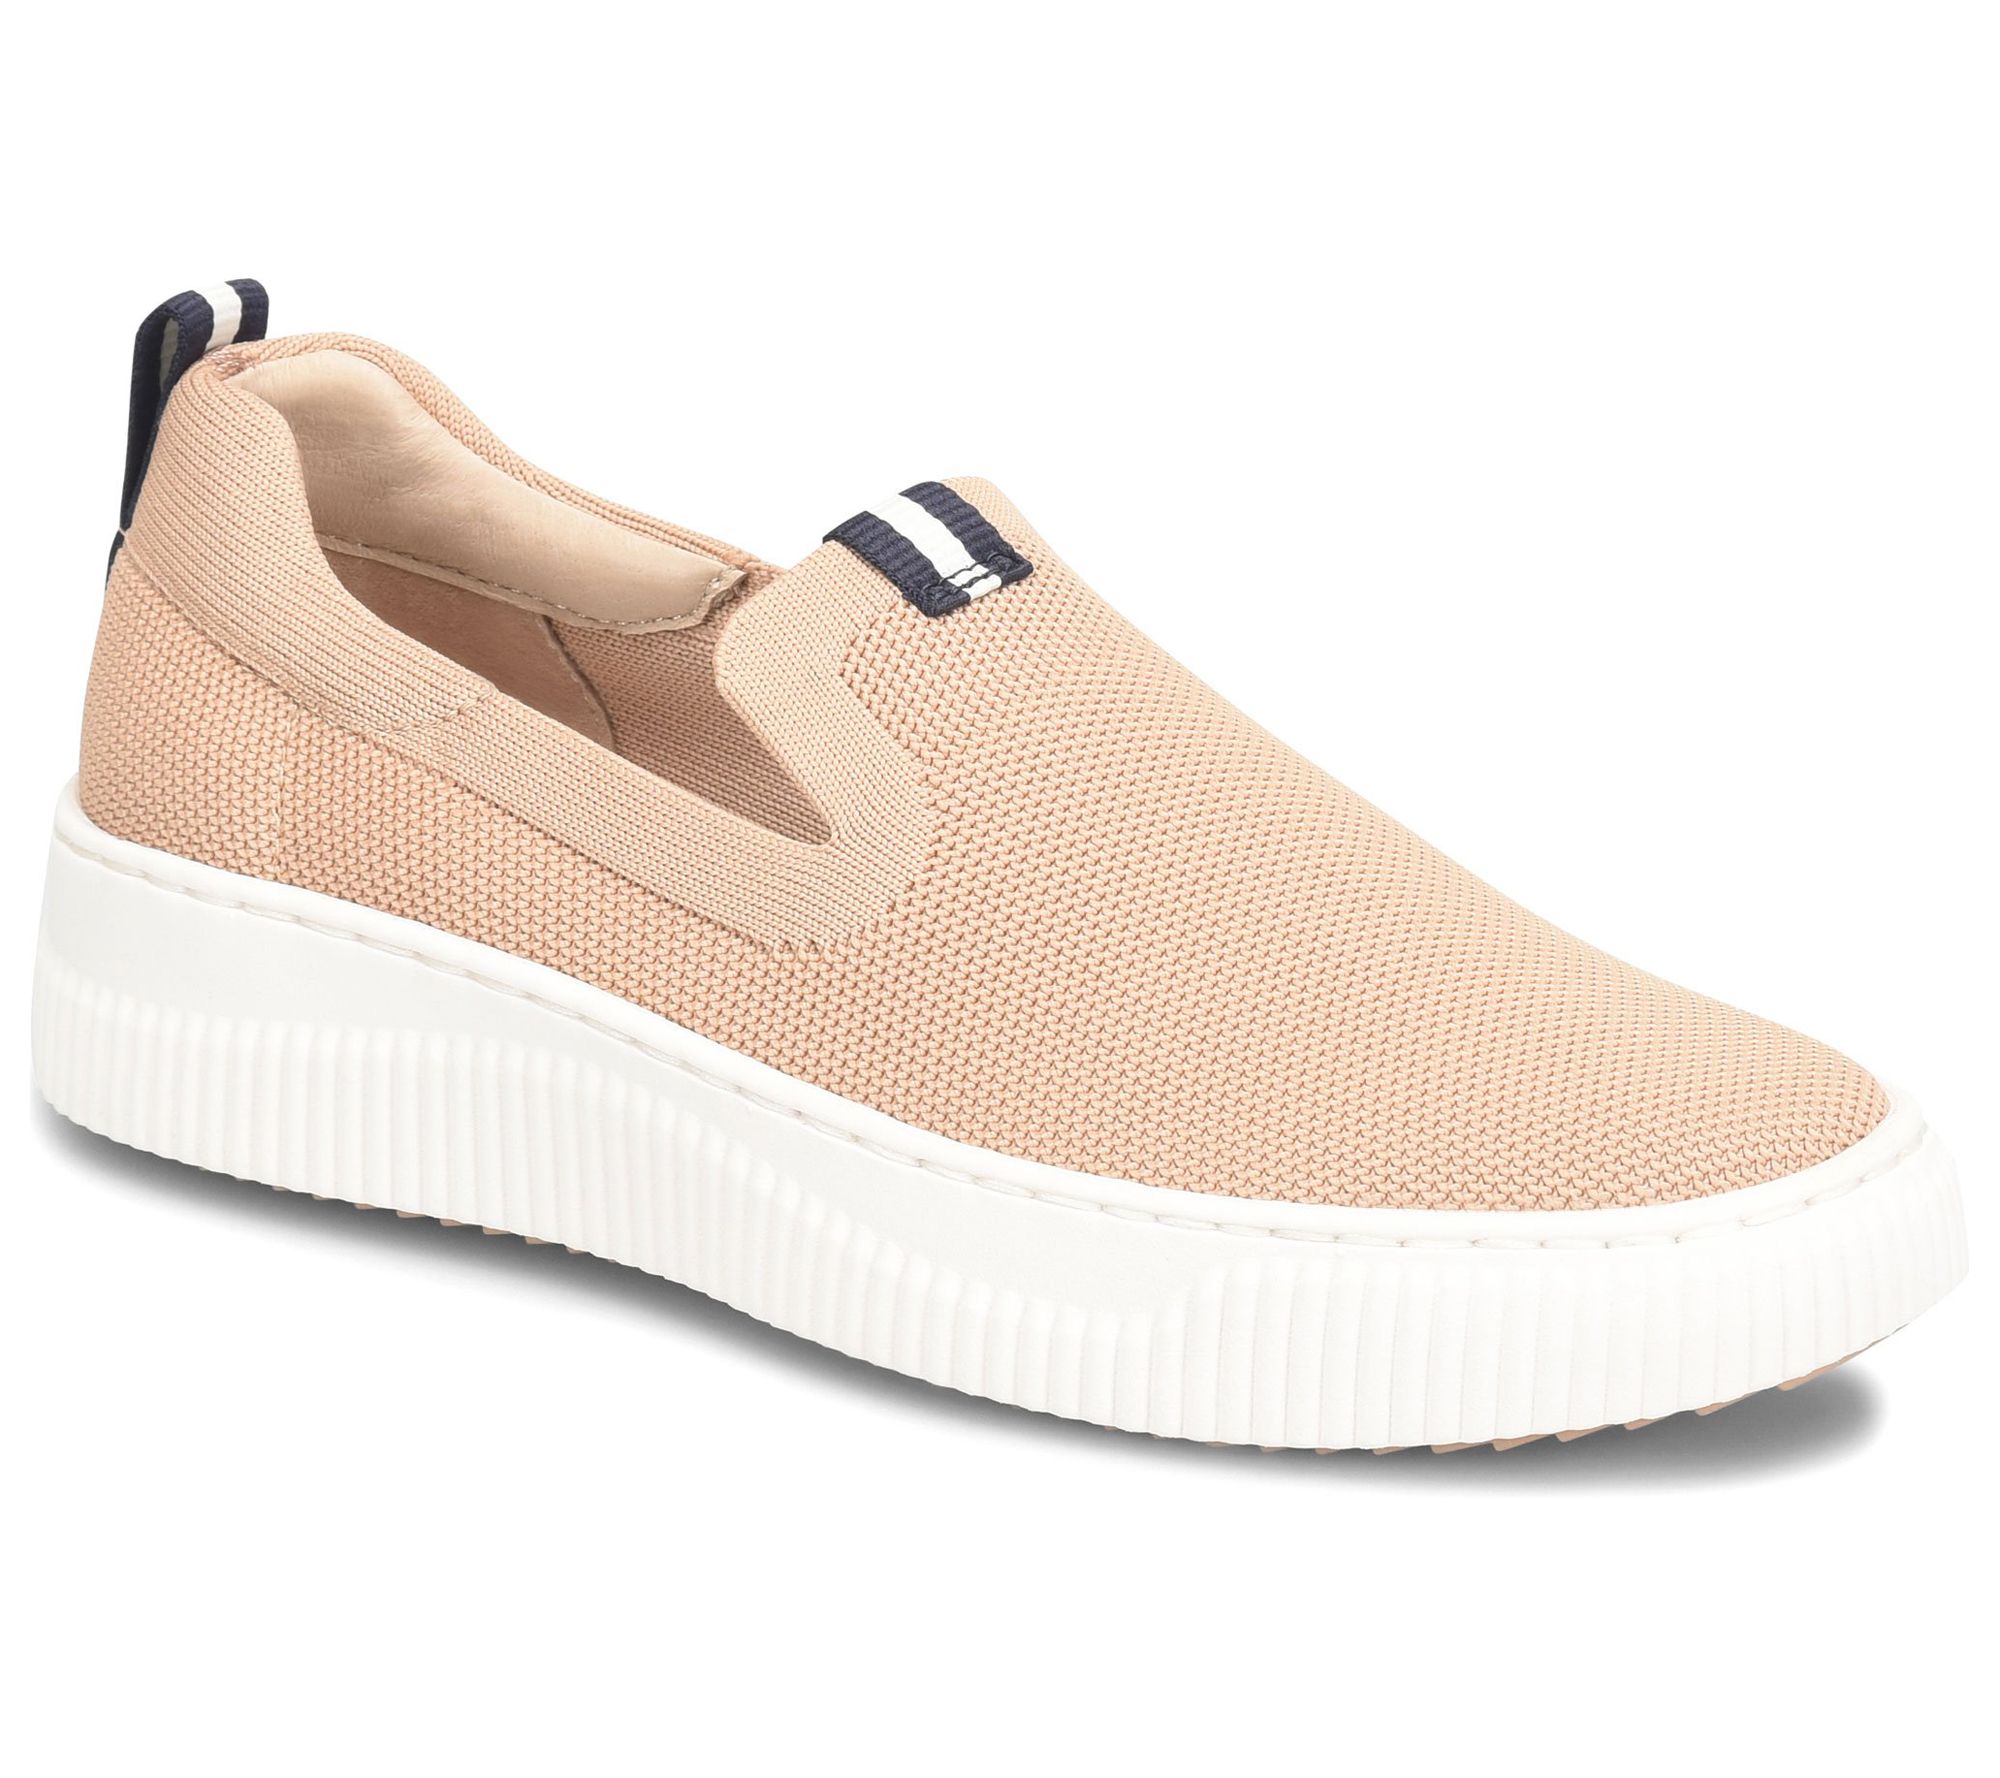 Sofft Recycled Knit Slip On Sneaker - Frayda - QVC.com